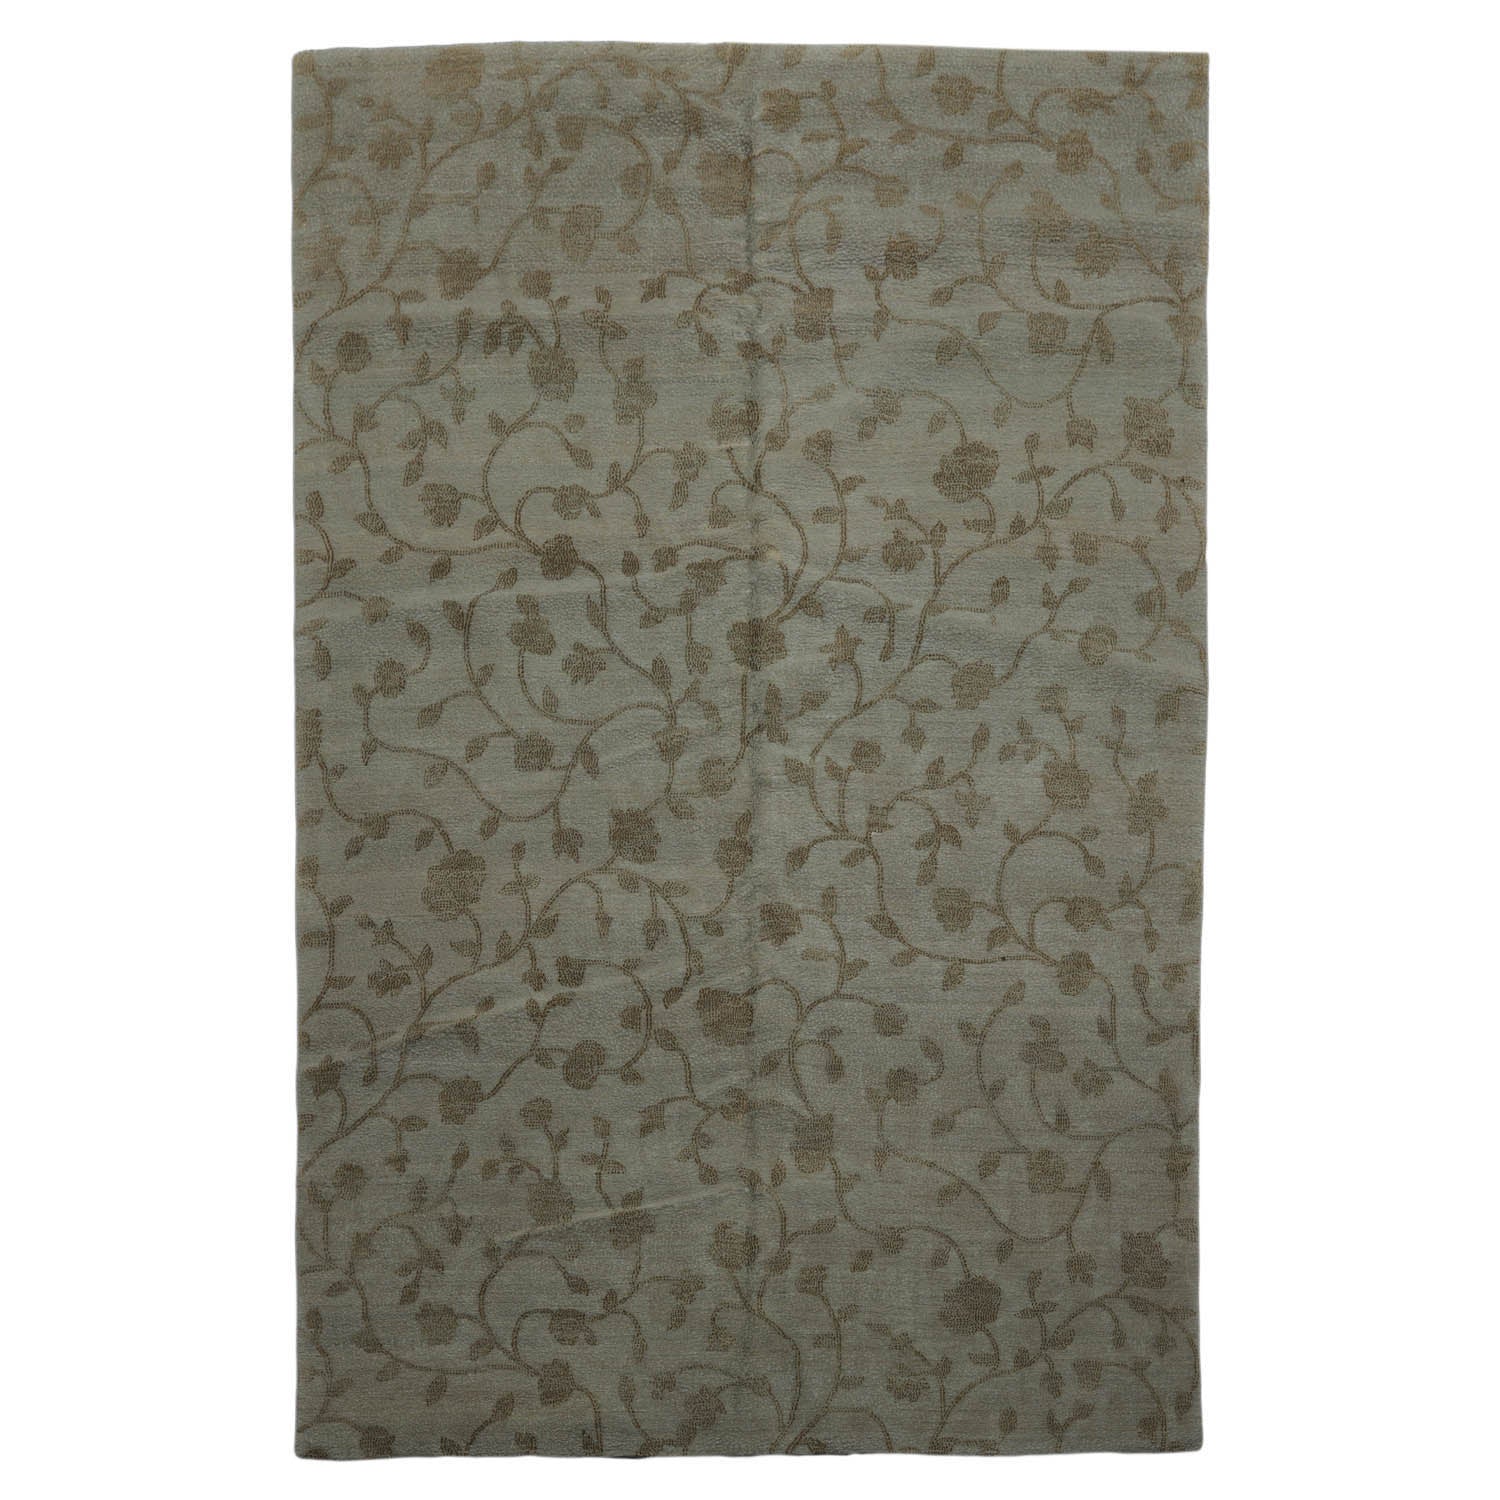 Neece 6x9 Hand Knotted Tibetan 100% Wool Lapchi Transitional Oriental Area Rug Gray, Green Color